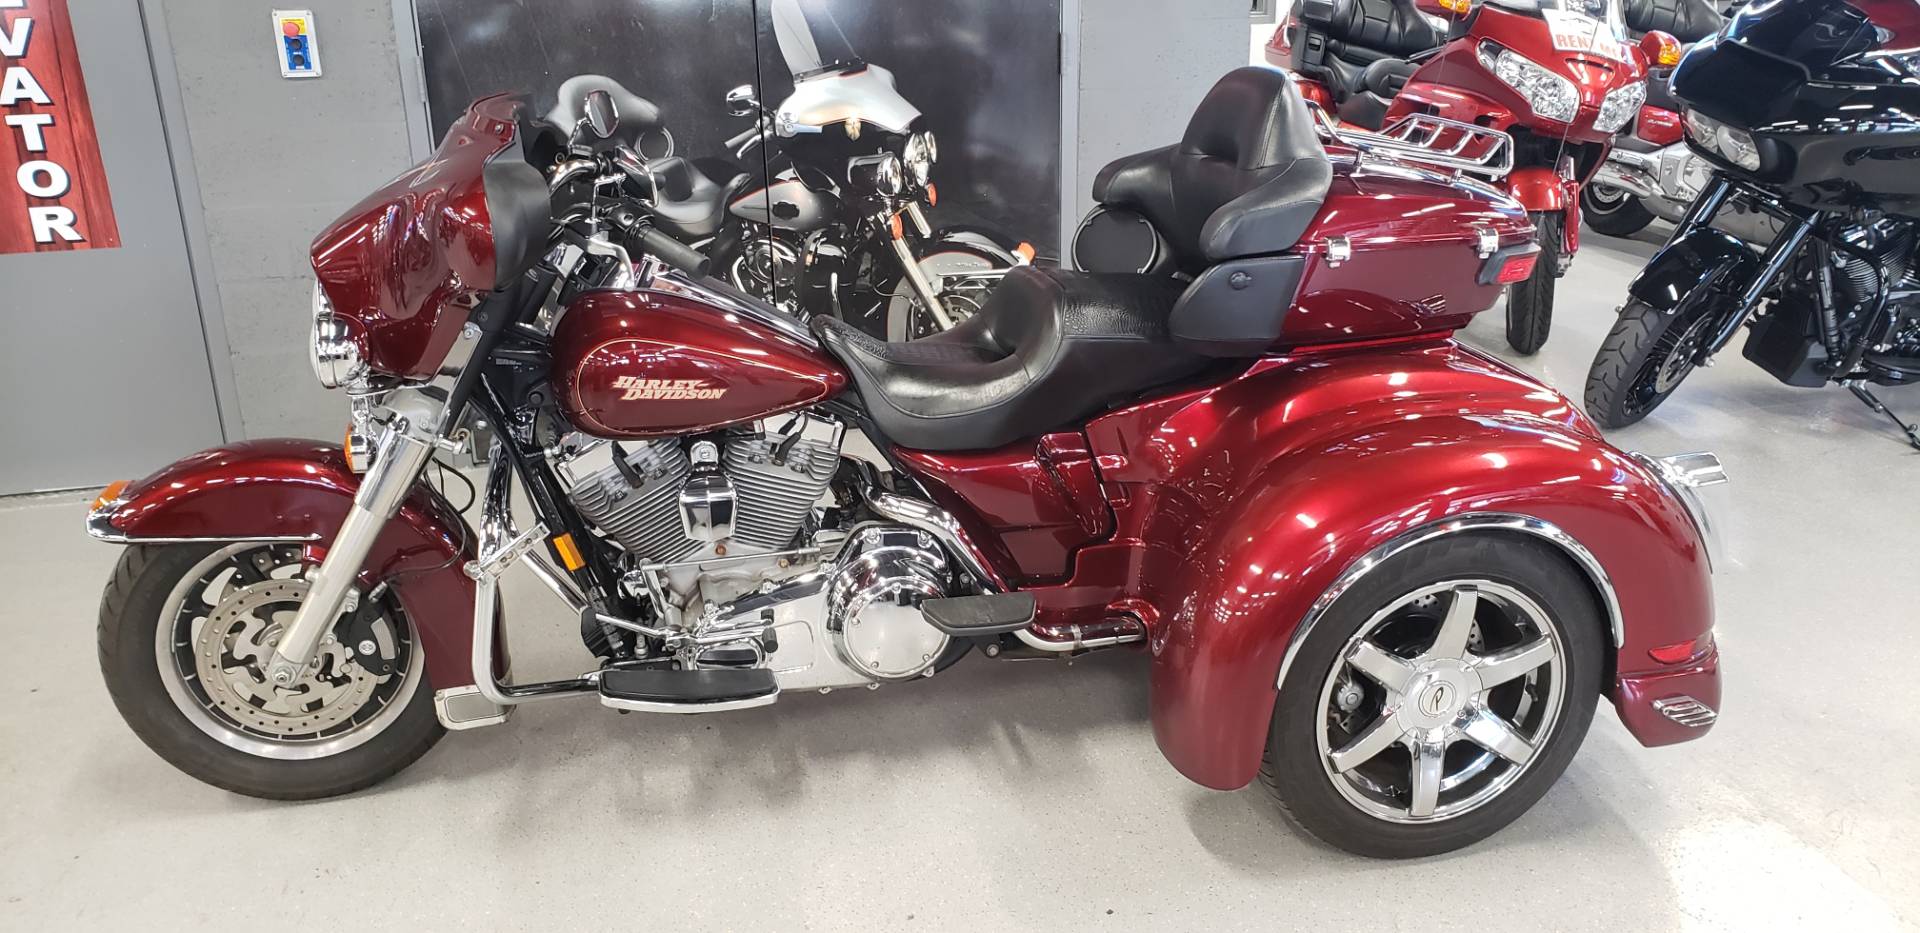 Used 2008 Harley-Davidson Electra glide Trikes in Fort Myers, FL ...